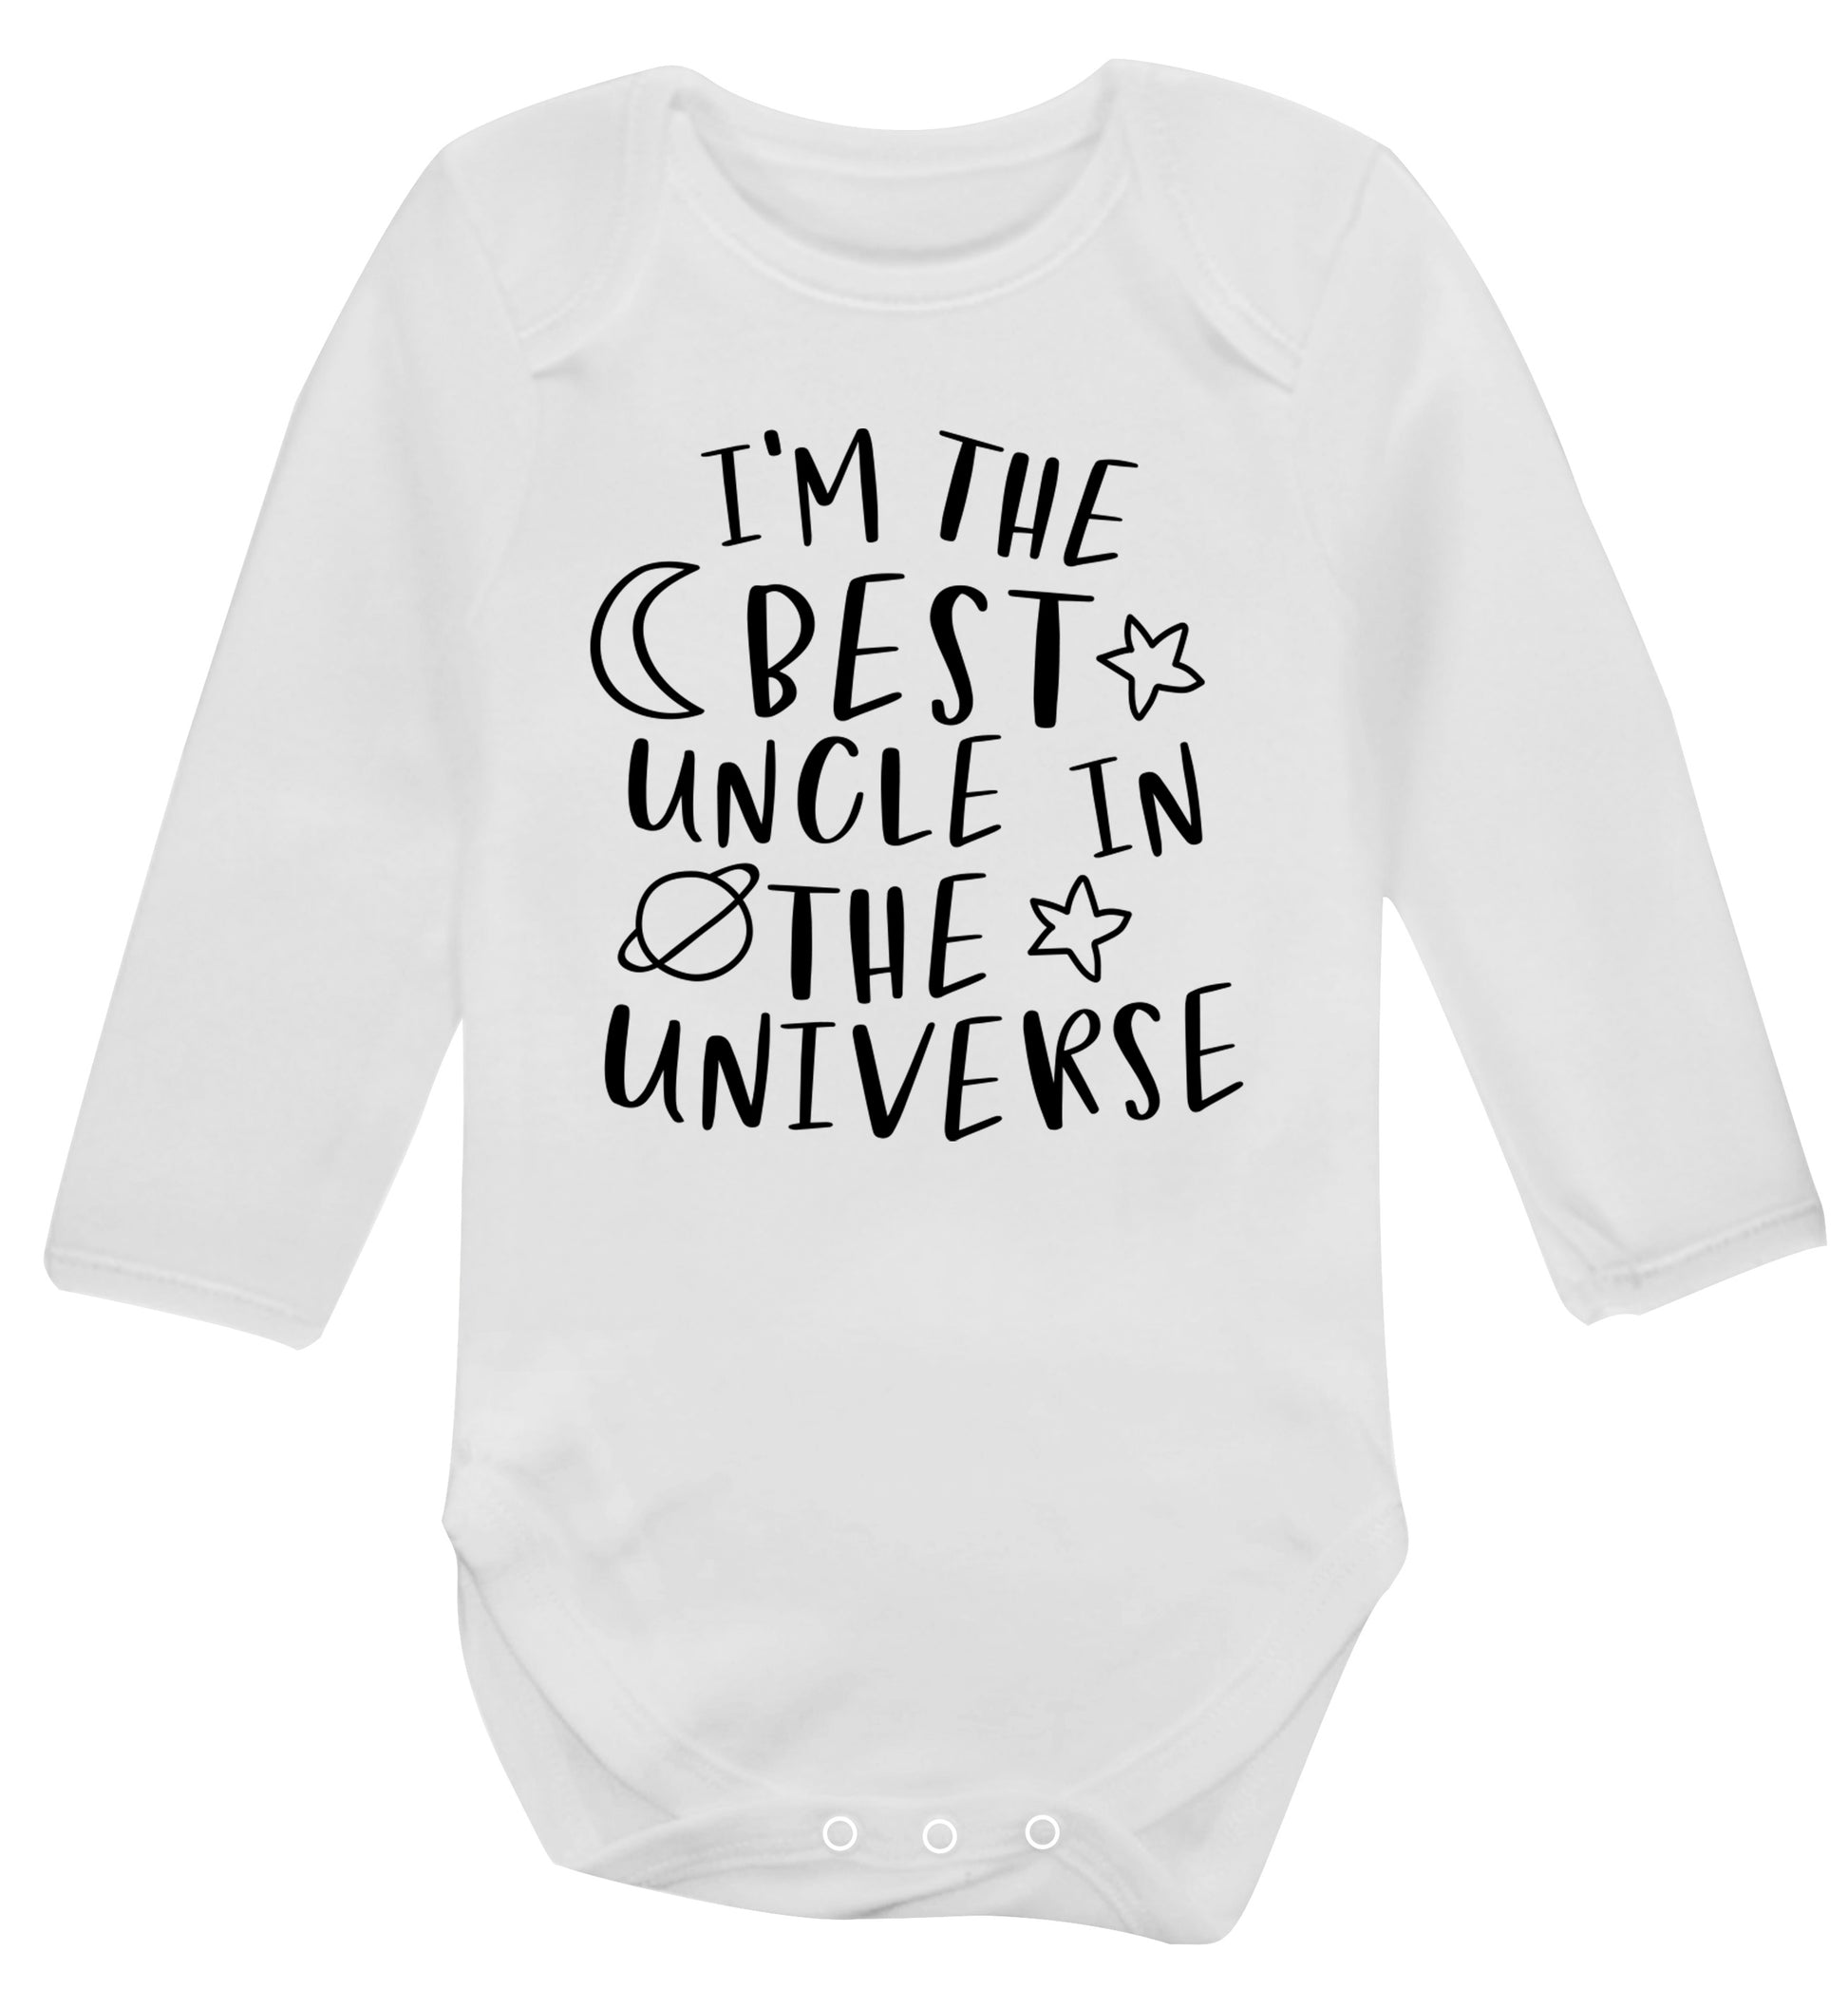 I'm the best uncle in the universe Baby Vest long sleeved white 6-12 months